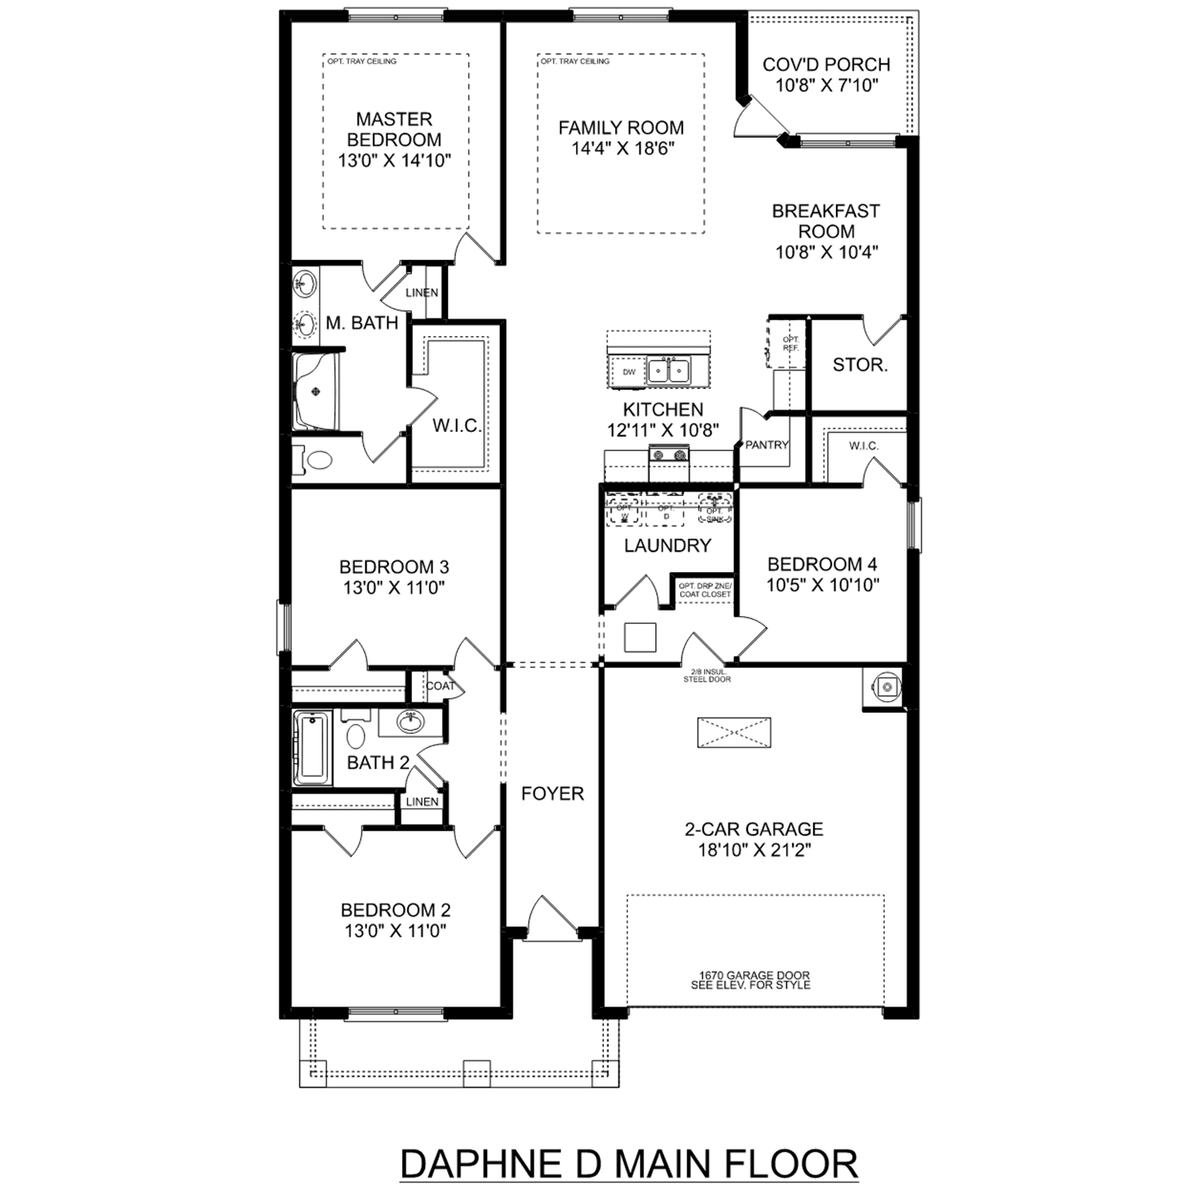 1 - The Daphne D buildable floor plan layout in Davidson Homes' Spragins Cove community.